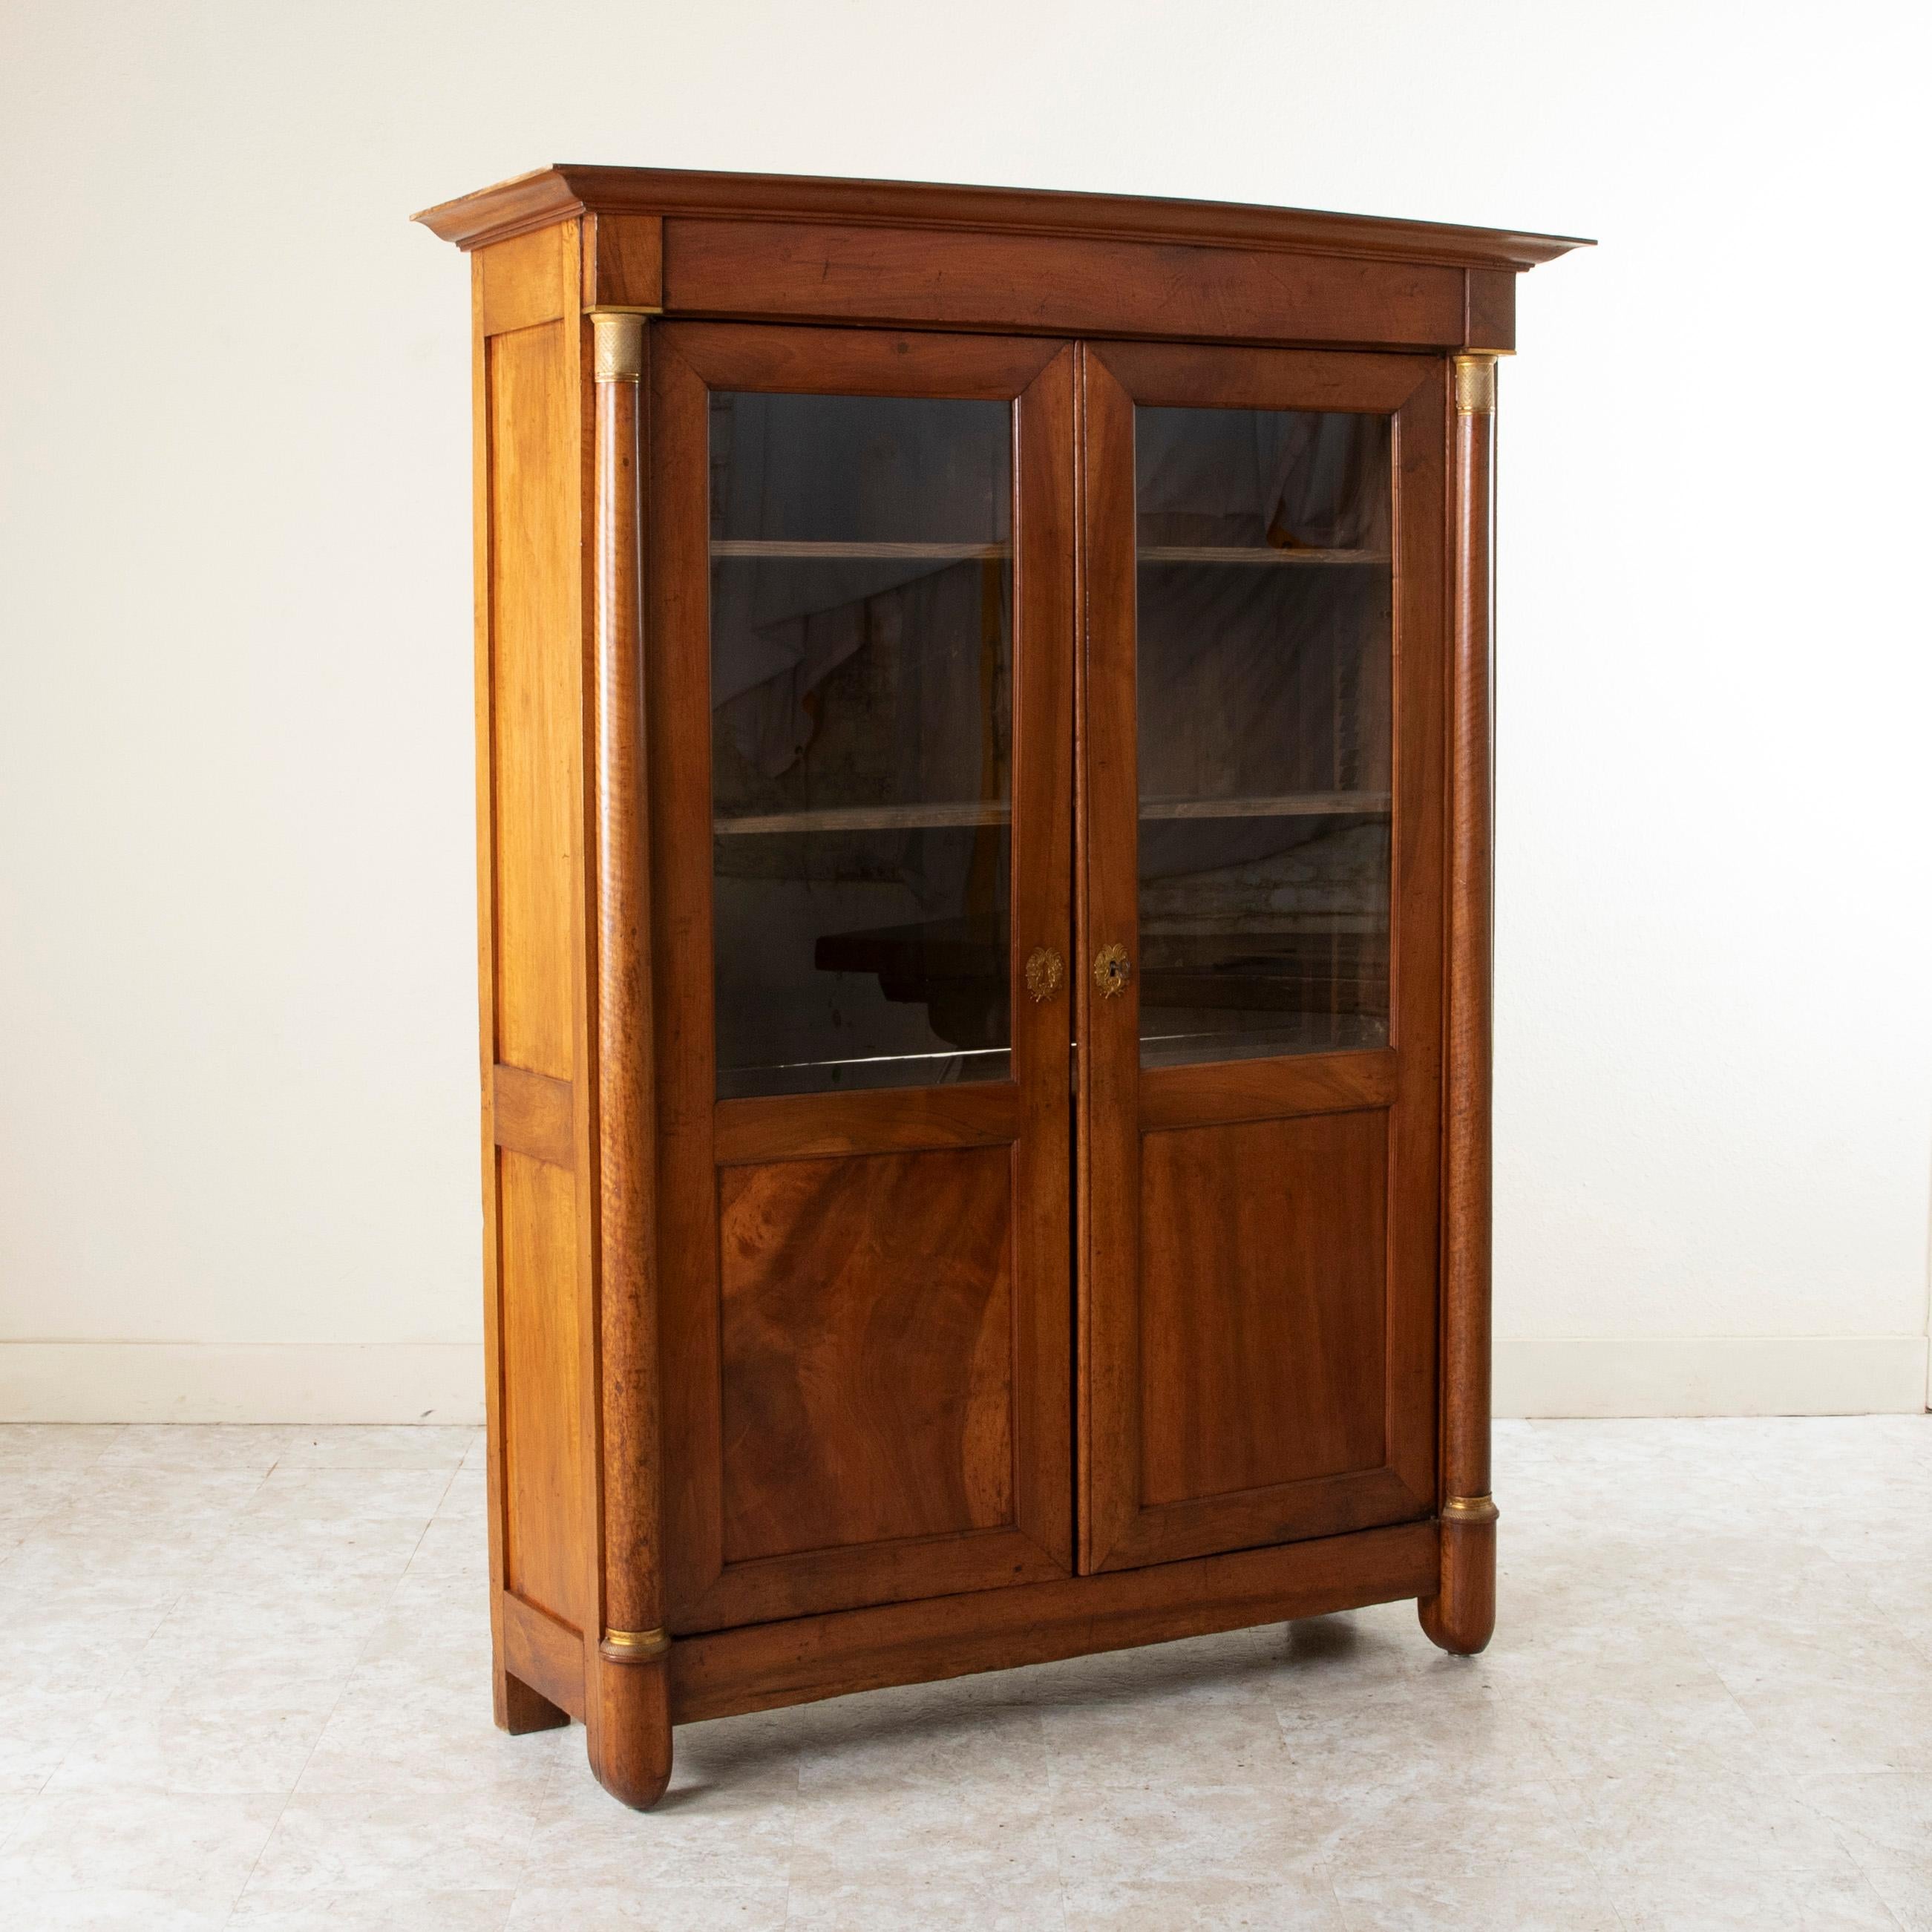 This early nineteenth century Empire period walnut bookcase features half columns that flank its glass doors. The columns are capped in bronze detailed with diamond and a Vitruvian scroll pattern. The base of the columns are additionally detailed in